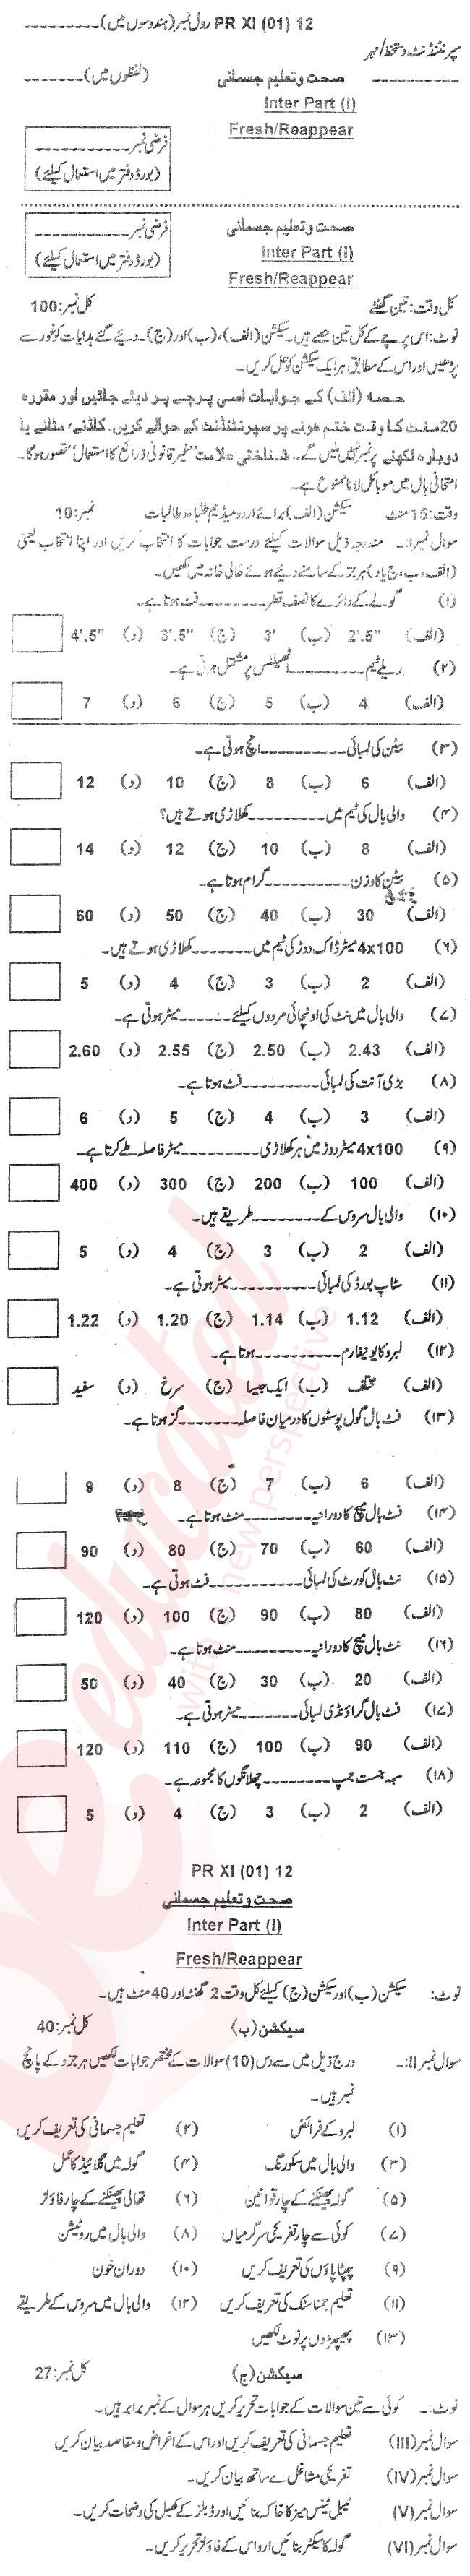 Health and Physical Education FA Part 1 Past Paper Group 1 BISE Peshawar 2012